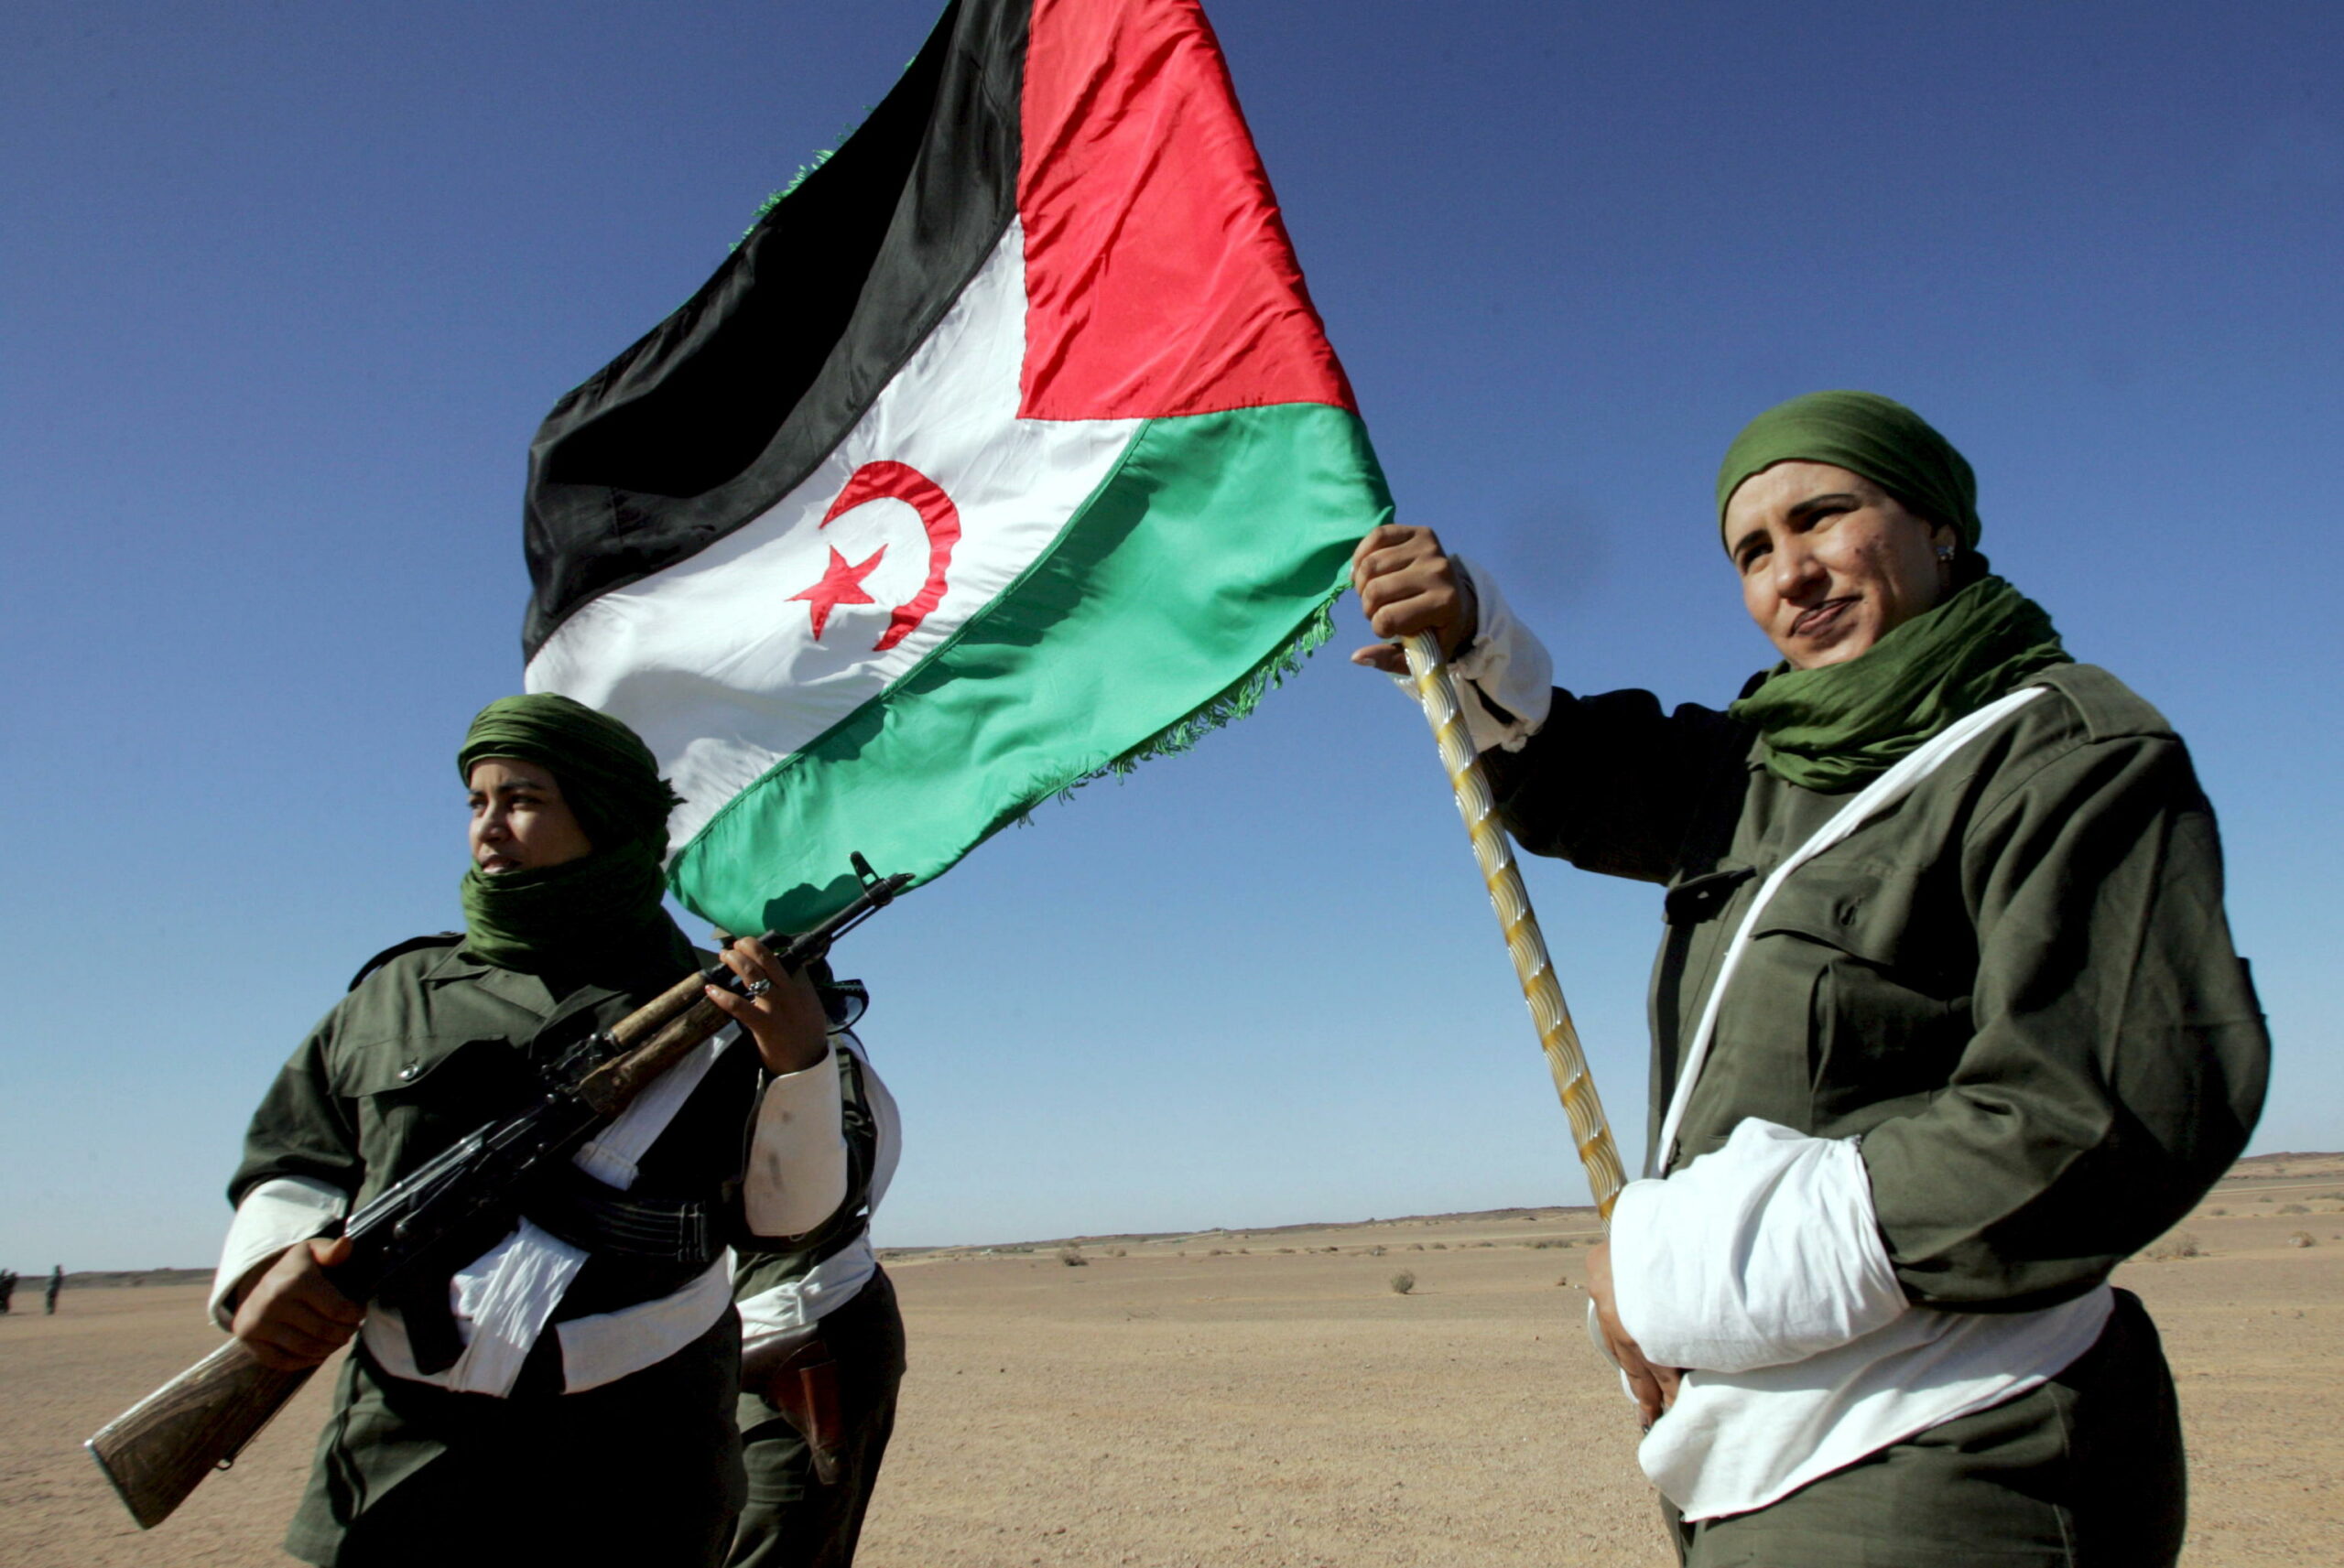 epa08817663 (FILE) - A Sahrawi woman soldier carries a flag of the Democratic Arab Republic of Sahara as another one looks on, during a parade  in Tifariti in the liberated territories of Western Sahara, 20 May 2008 (reissued 13 November 2020). The Moroccan Royal Armed Forces (FAR) on 13 November 2020 launched an operation to establish a 'security cordon' to control flow of people and goods across buffer zone on border linking Morocco to Mauritania. The Moroccan Foreign Ministry said the operation is meant to face the 'serious and unacceptable provocations' of the Polisario Front in the disputed territory of Guerguerat.  EPA/MOHAMED MESSARA